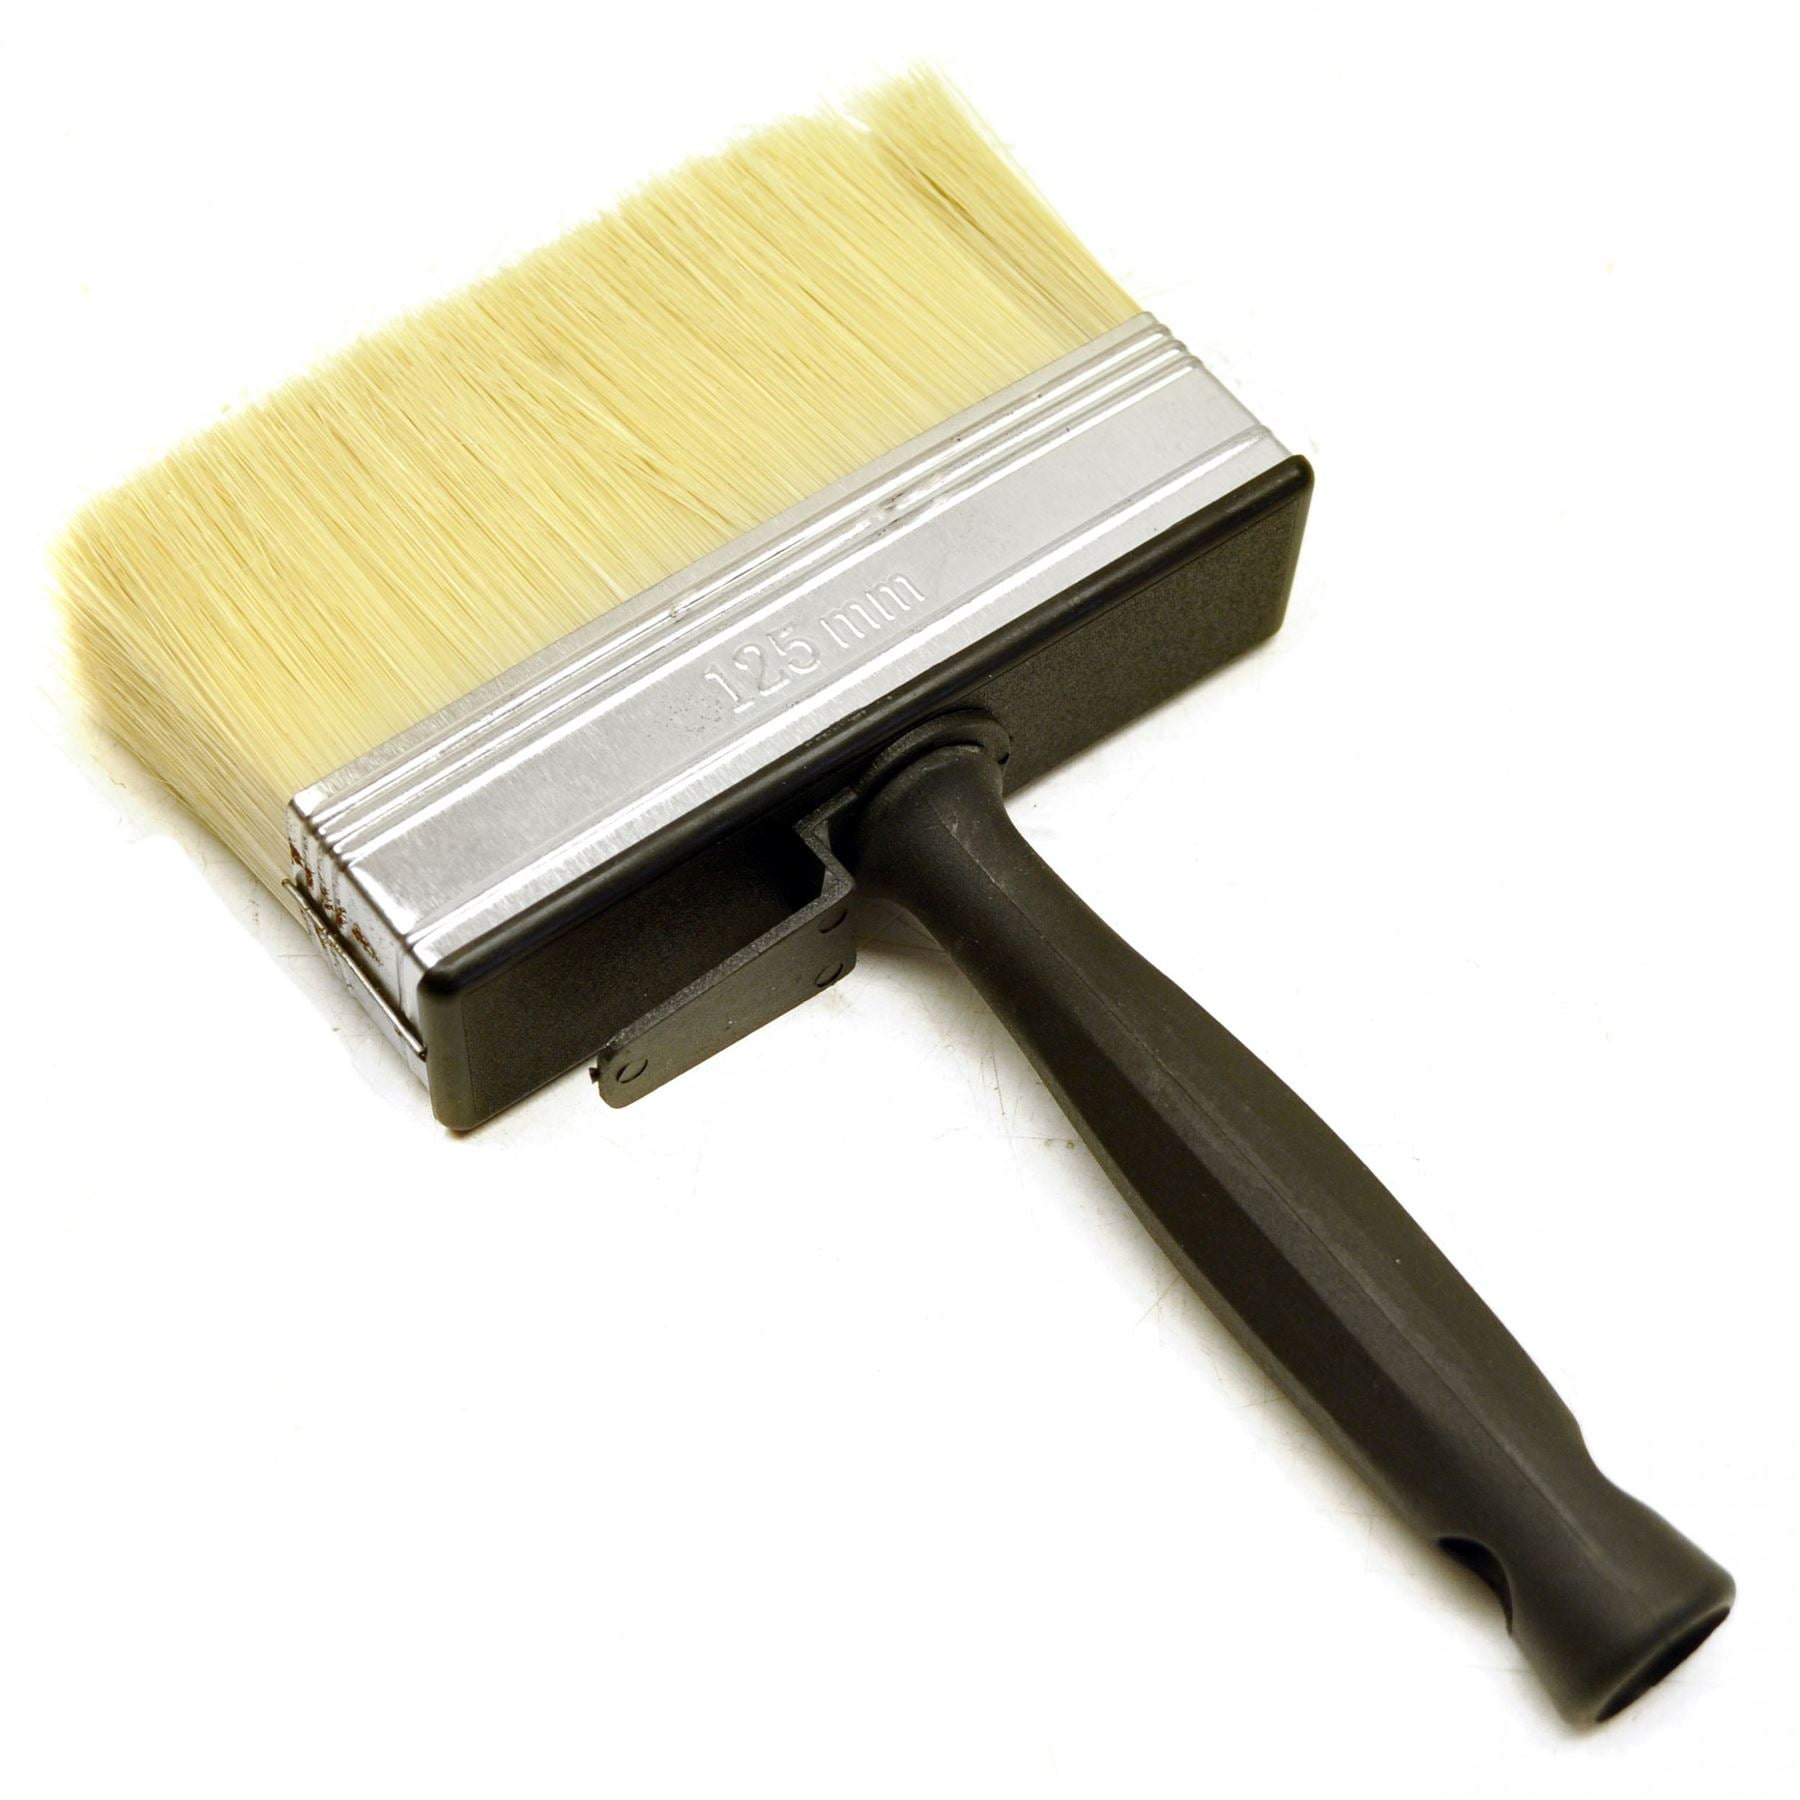 Large Paint Brush for Sheds, Fences Decking etc Wood Stain, Creosote etc SIL212